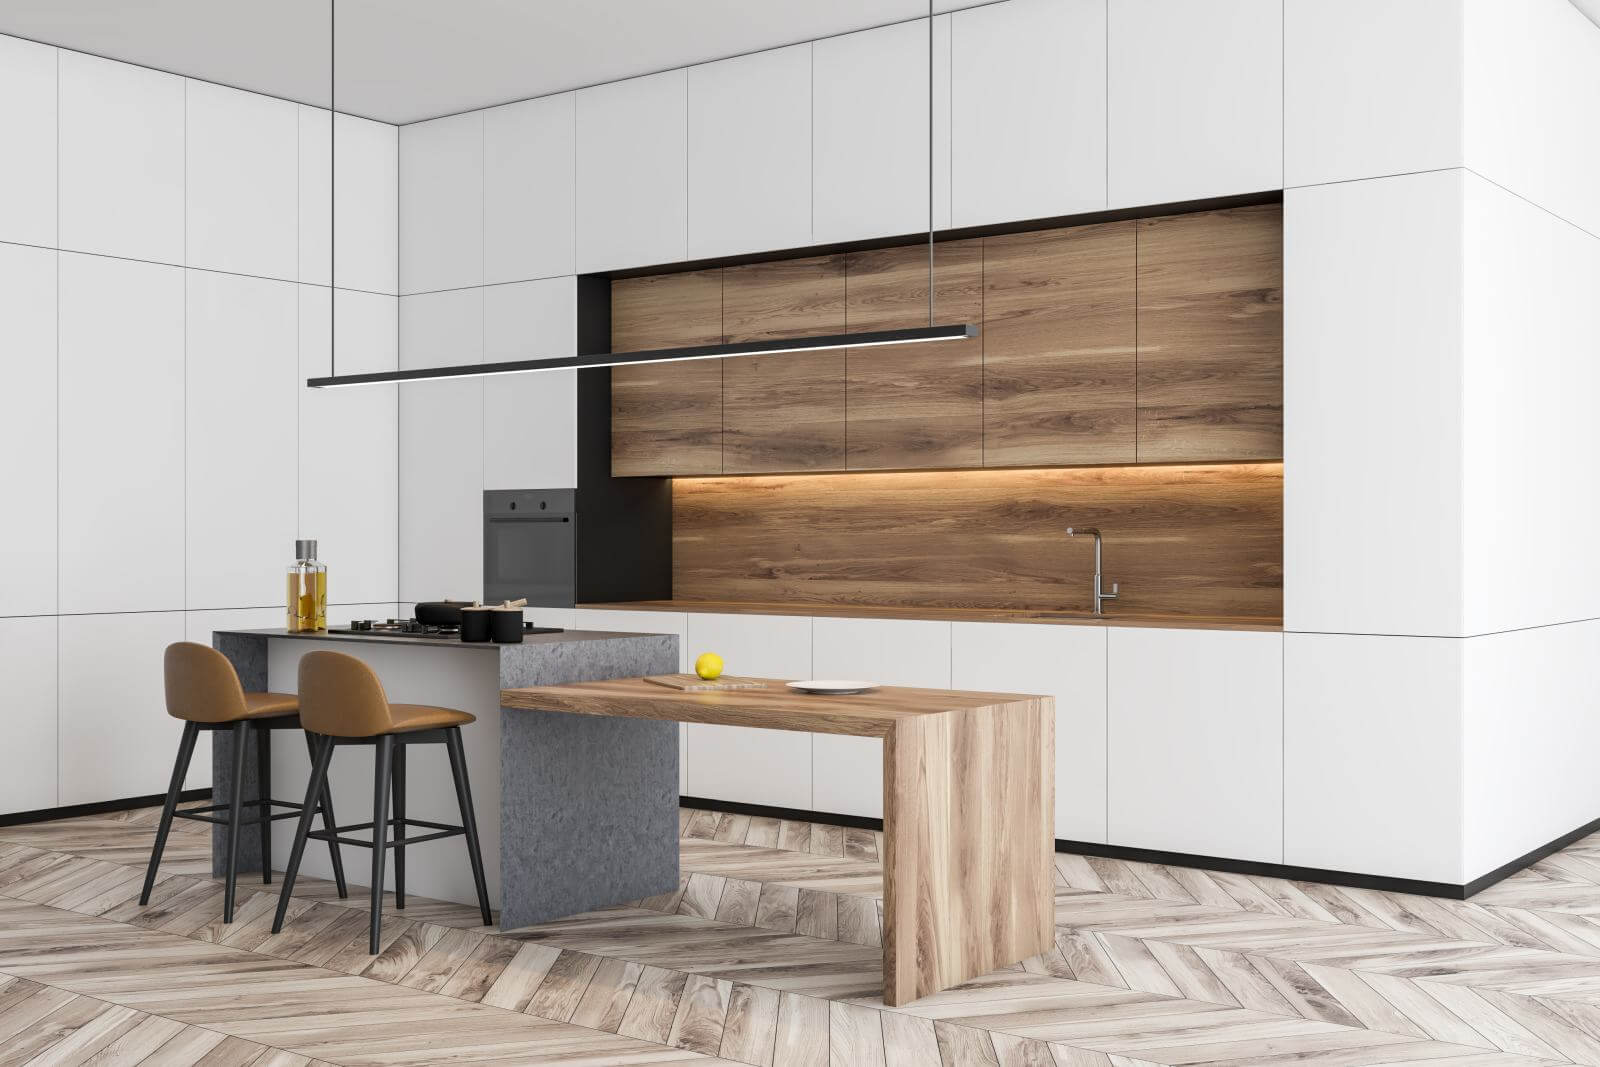 Corner of modern kitchen with white walls, wooden floor, white countertops, wooden cupboards and wooden bar with stools. 3d rendering